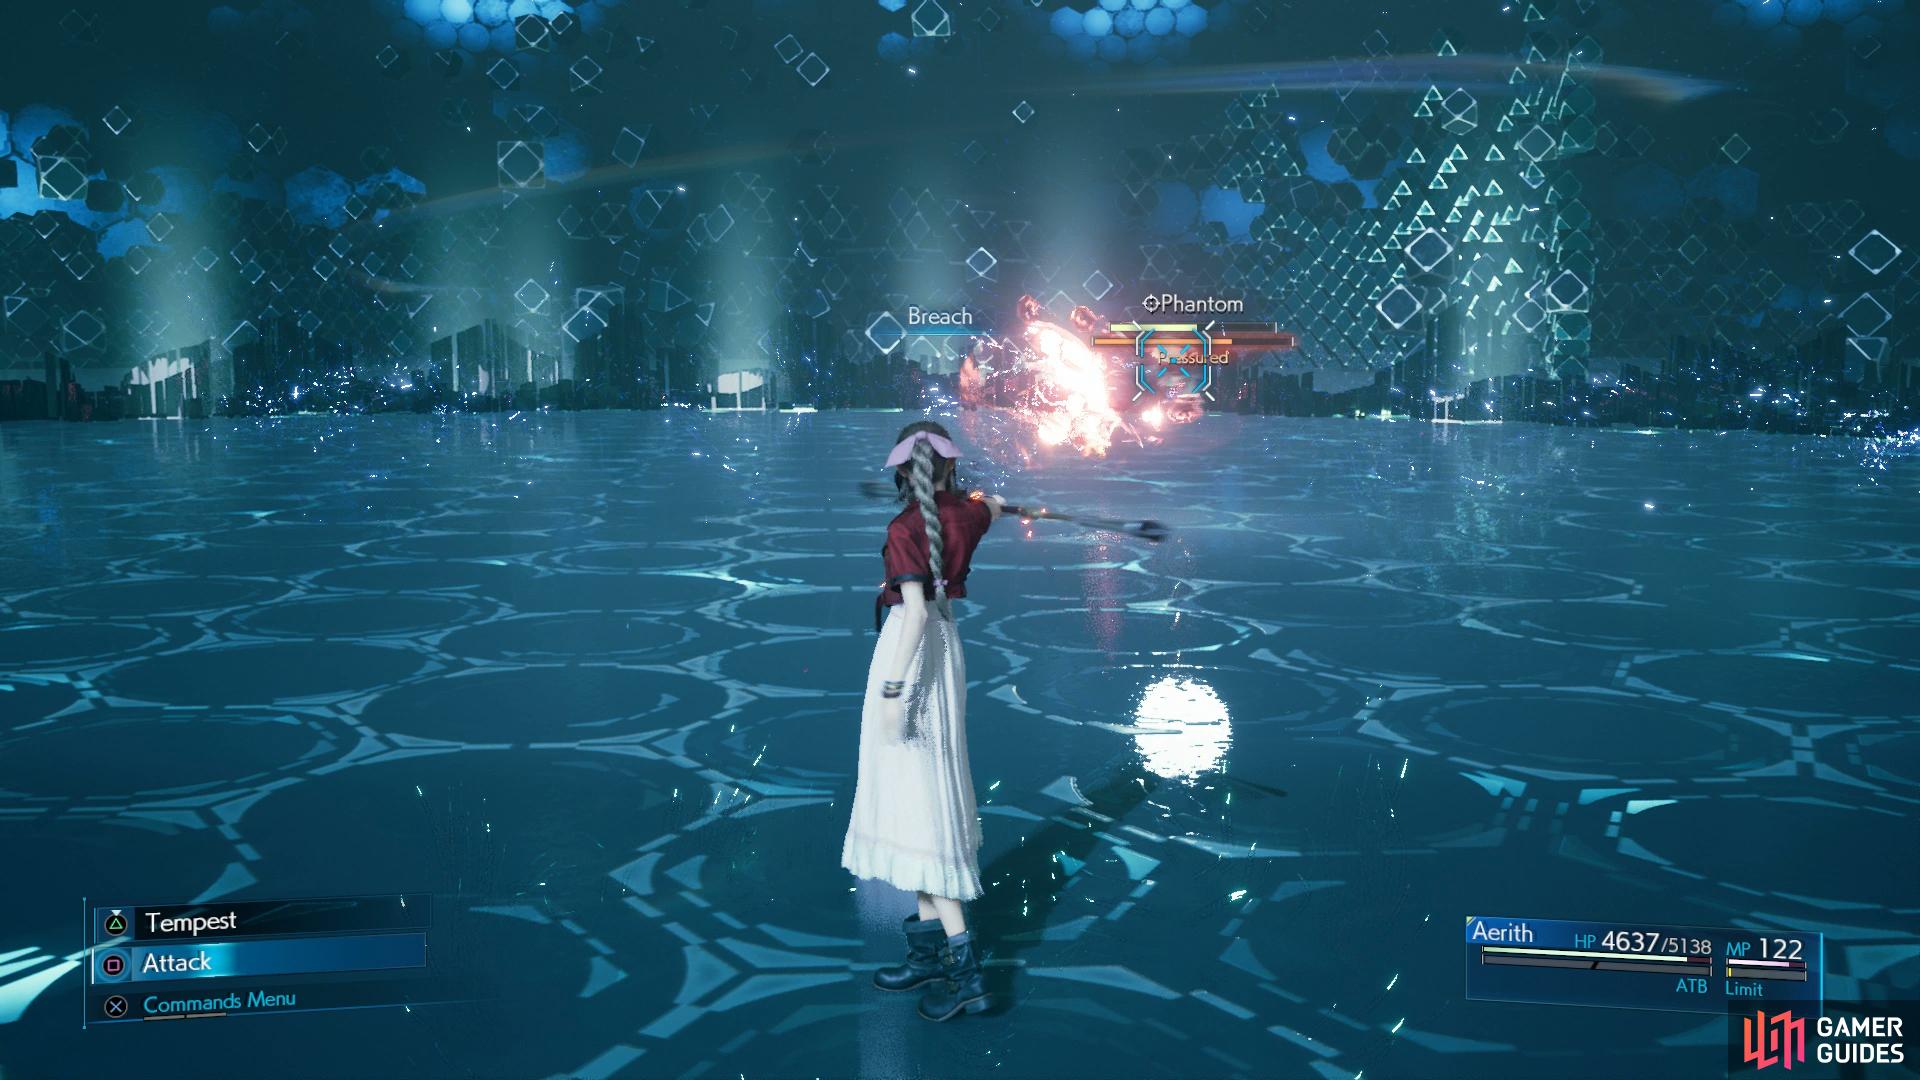 Aerith needs Subersion set at all costs or you’ll be stuck when Phantom uses Reflect.